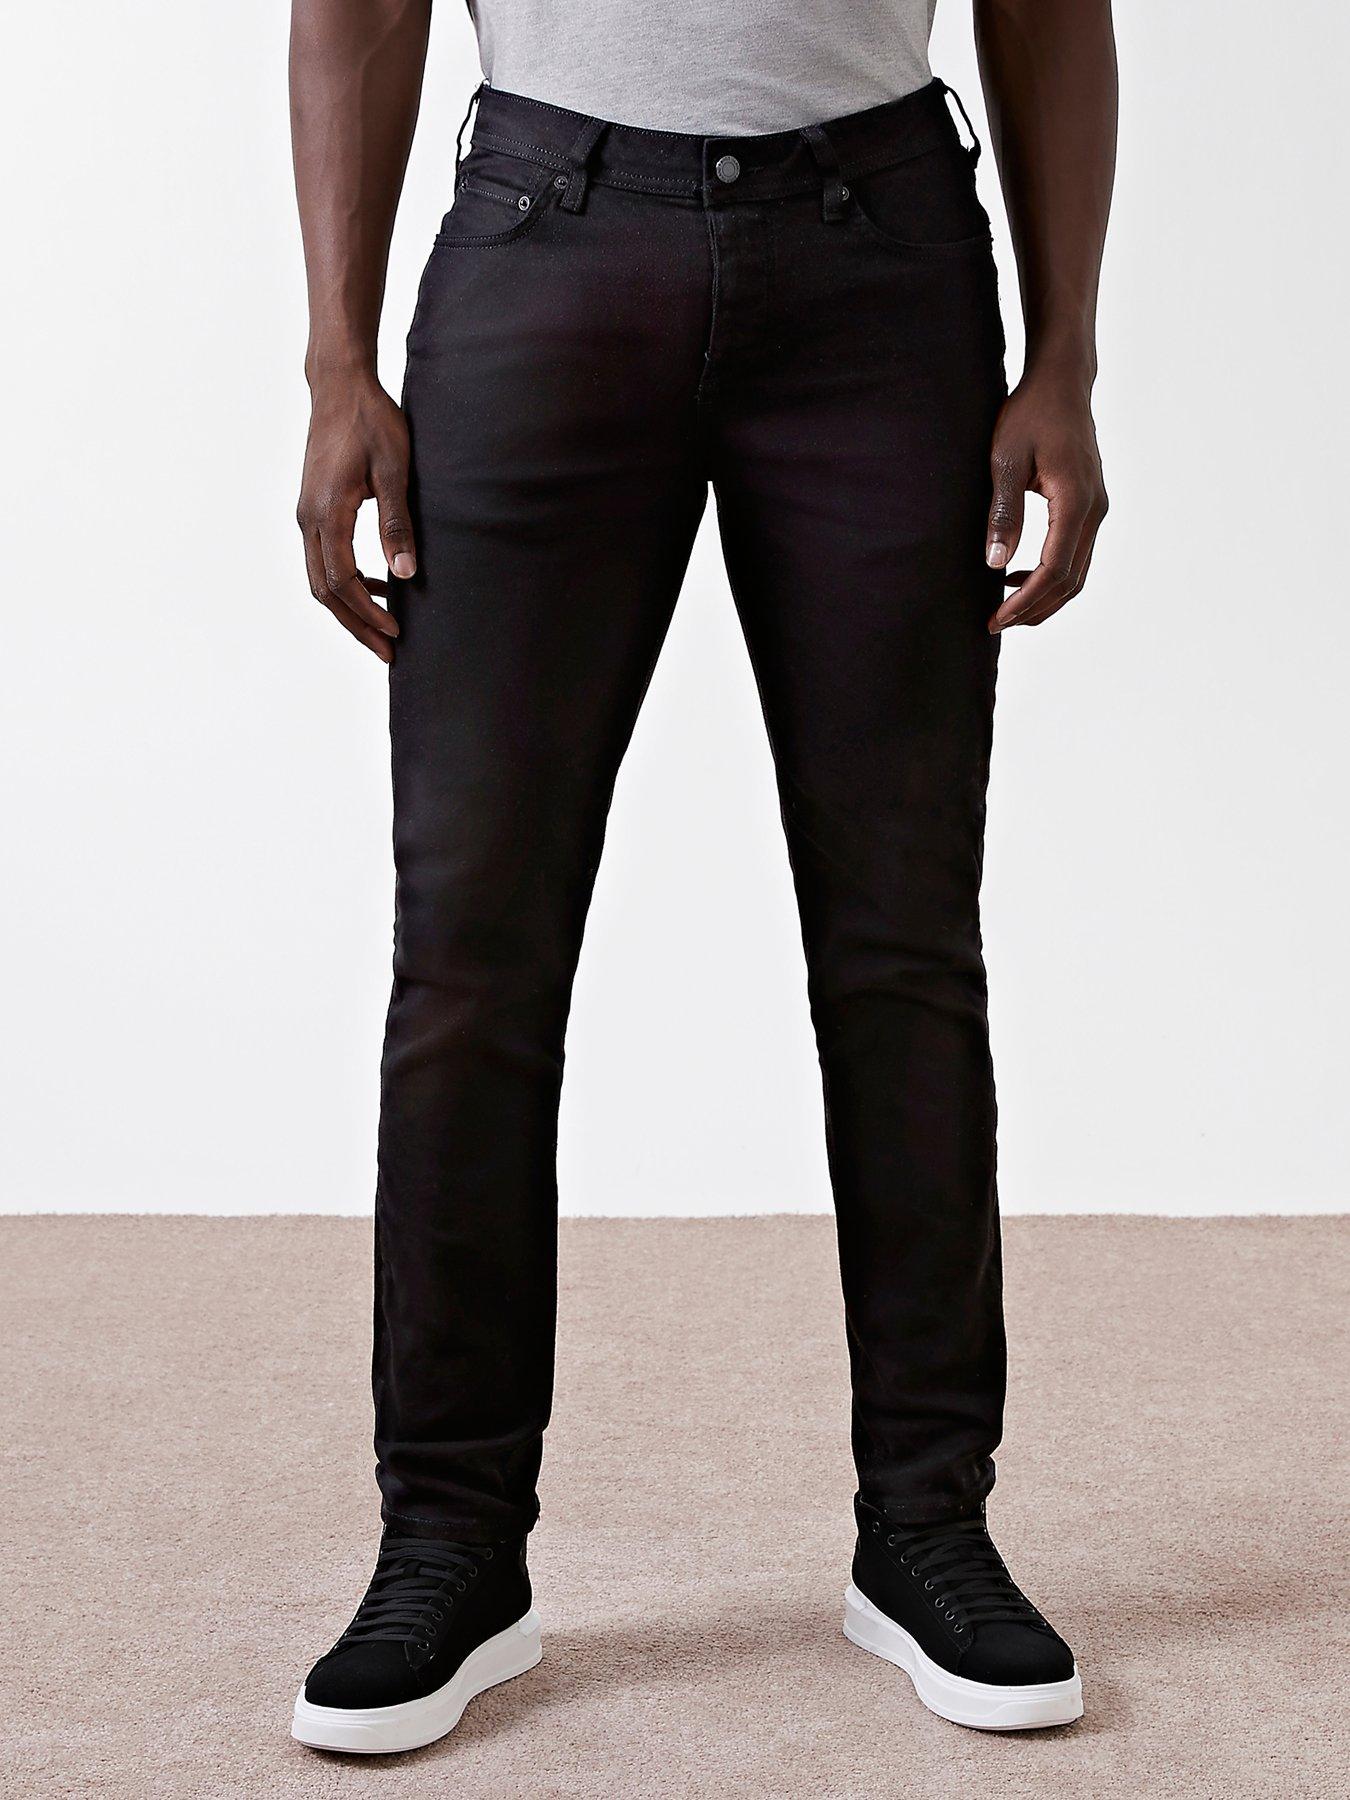 river island dylan jeans